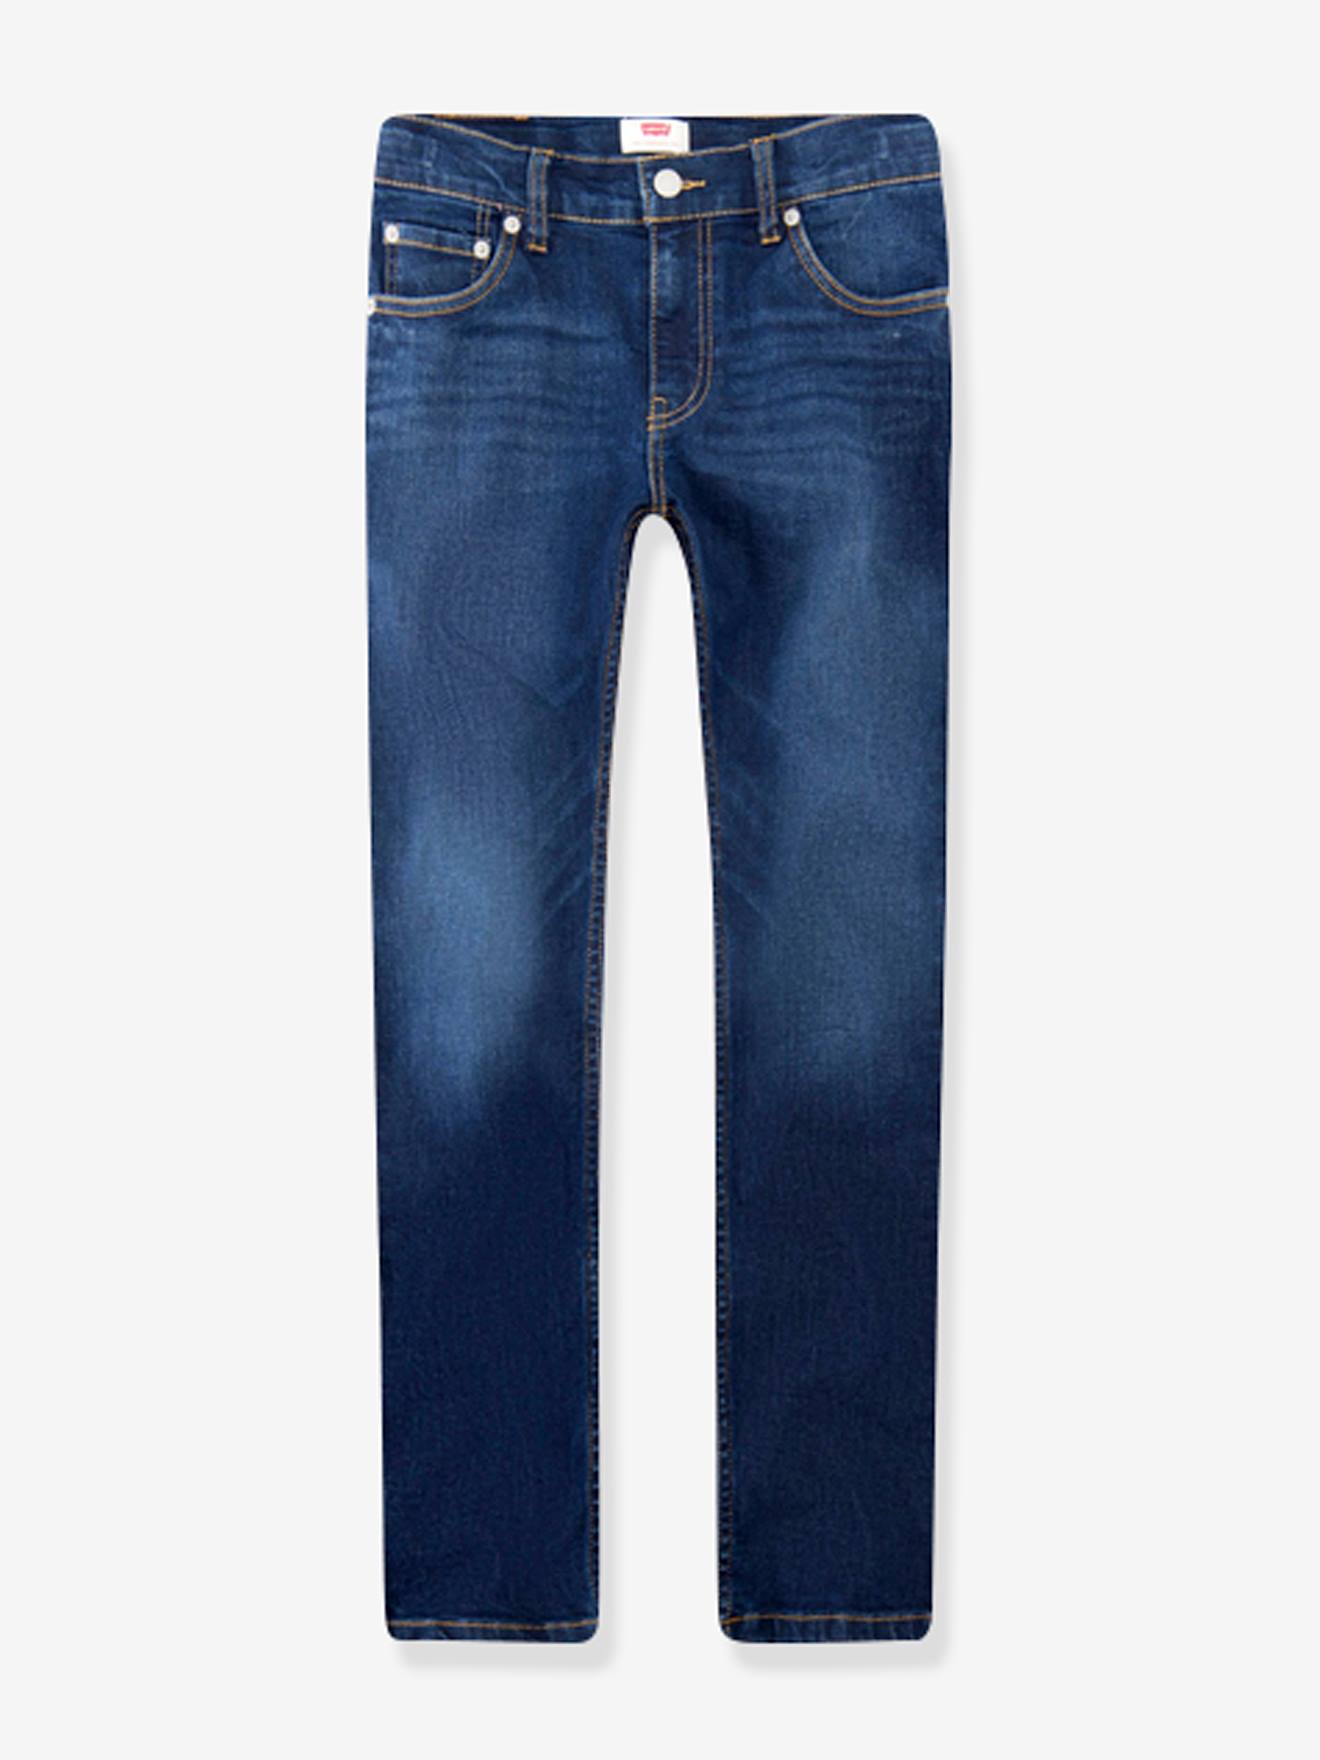 510 Skinny Jeans for Boys by Levi’s(r) stone